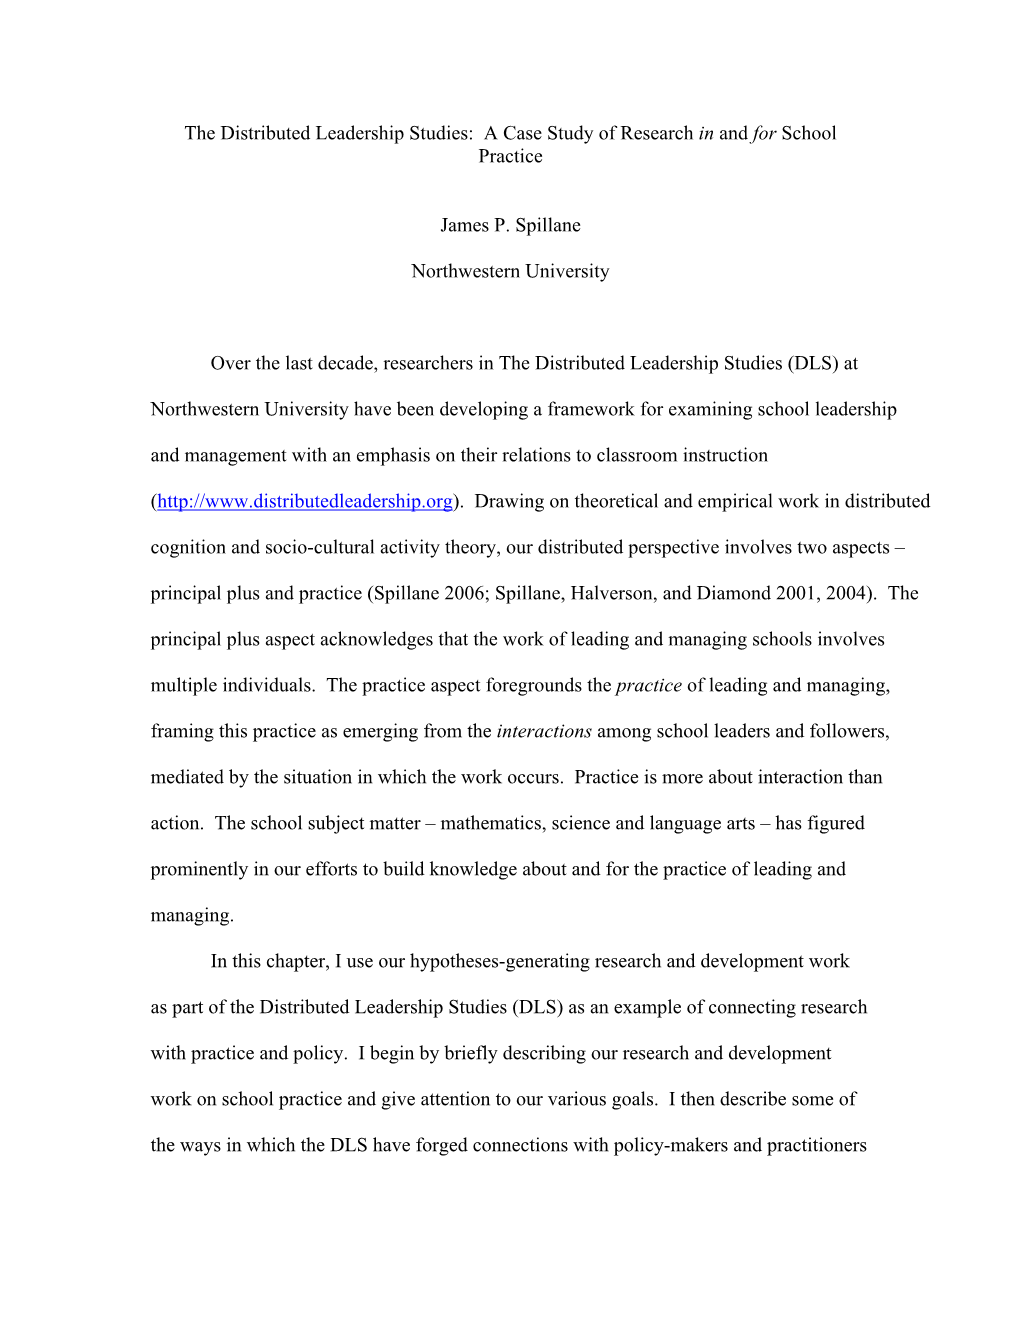 The Distributed Leadership Studies: a Case Study of Research in and for School Practice